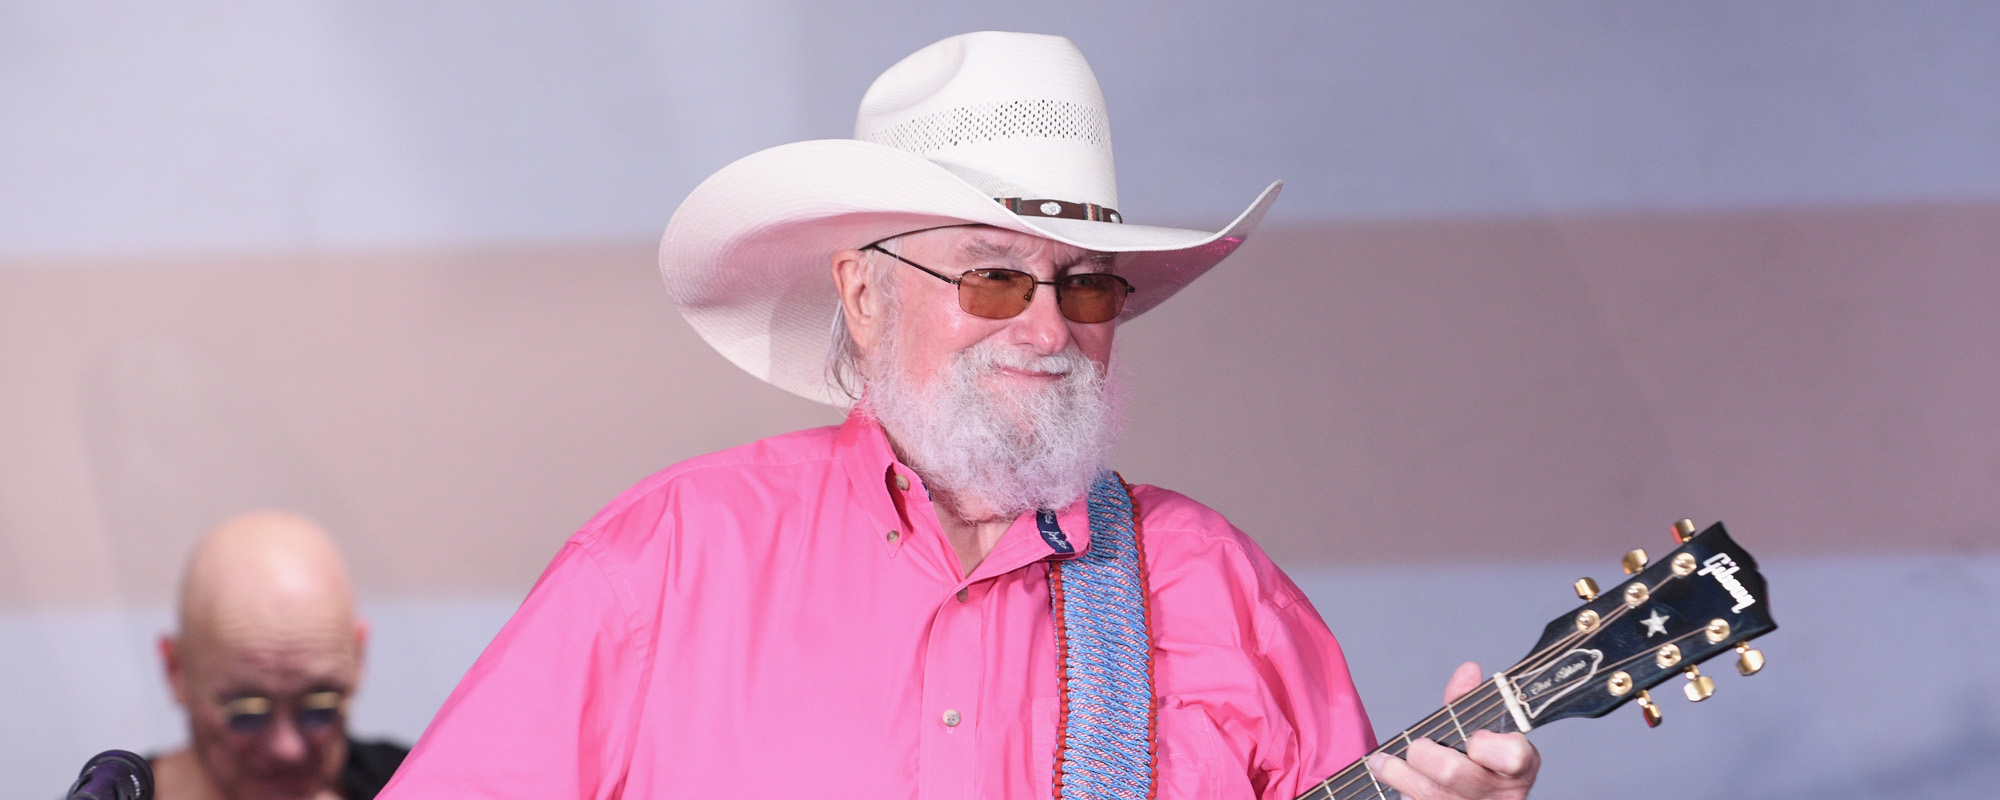 Exclusive Premiere: Live Recording of Charlie Daniels’ “The South’s Gonna Do It Again” from First Volunteer Jam to be Released